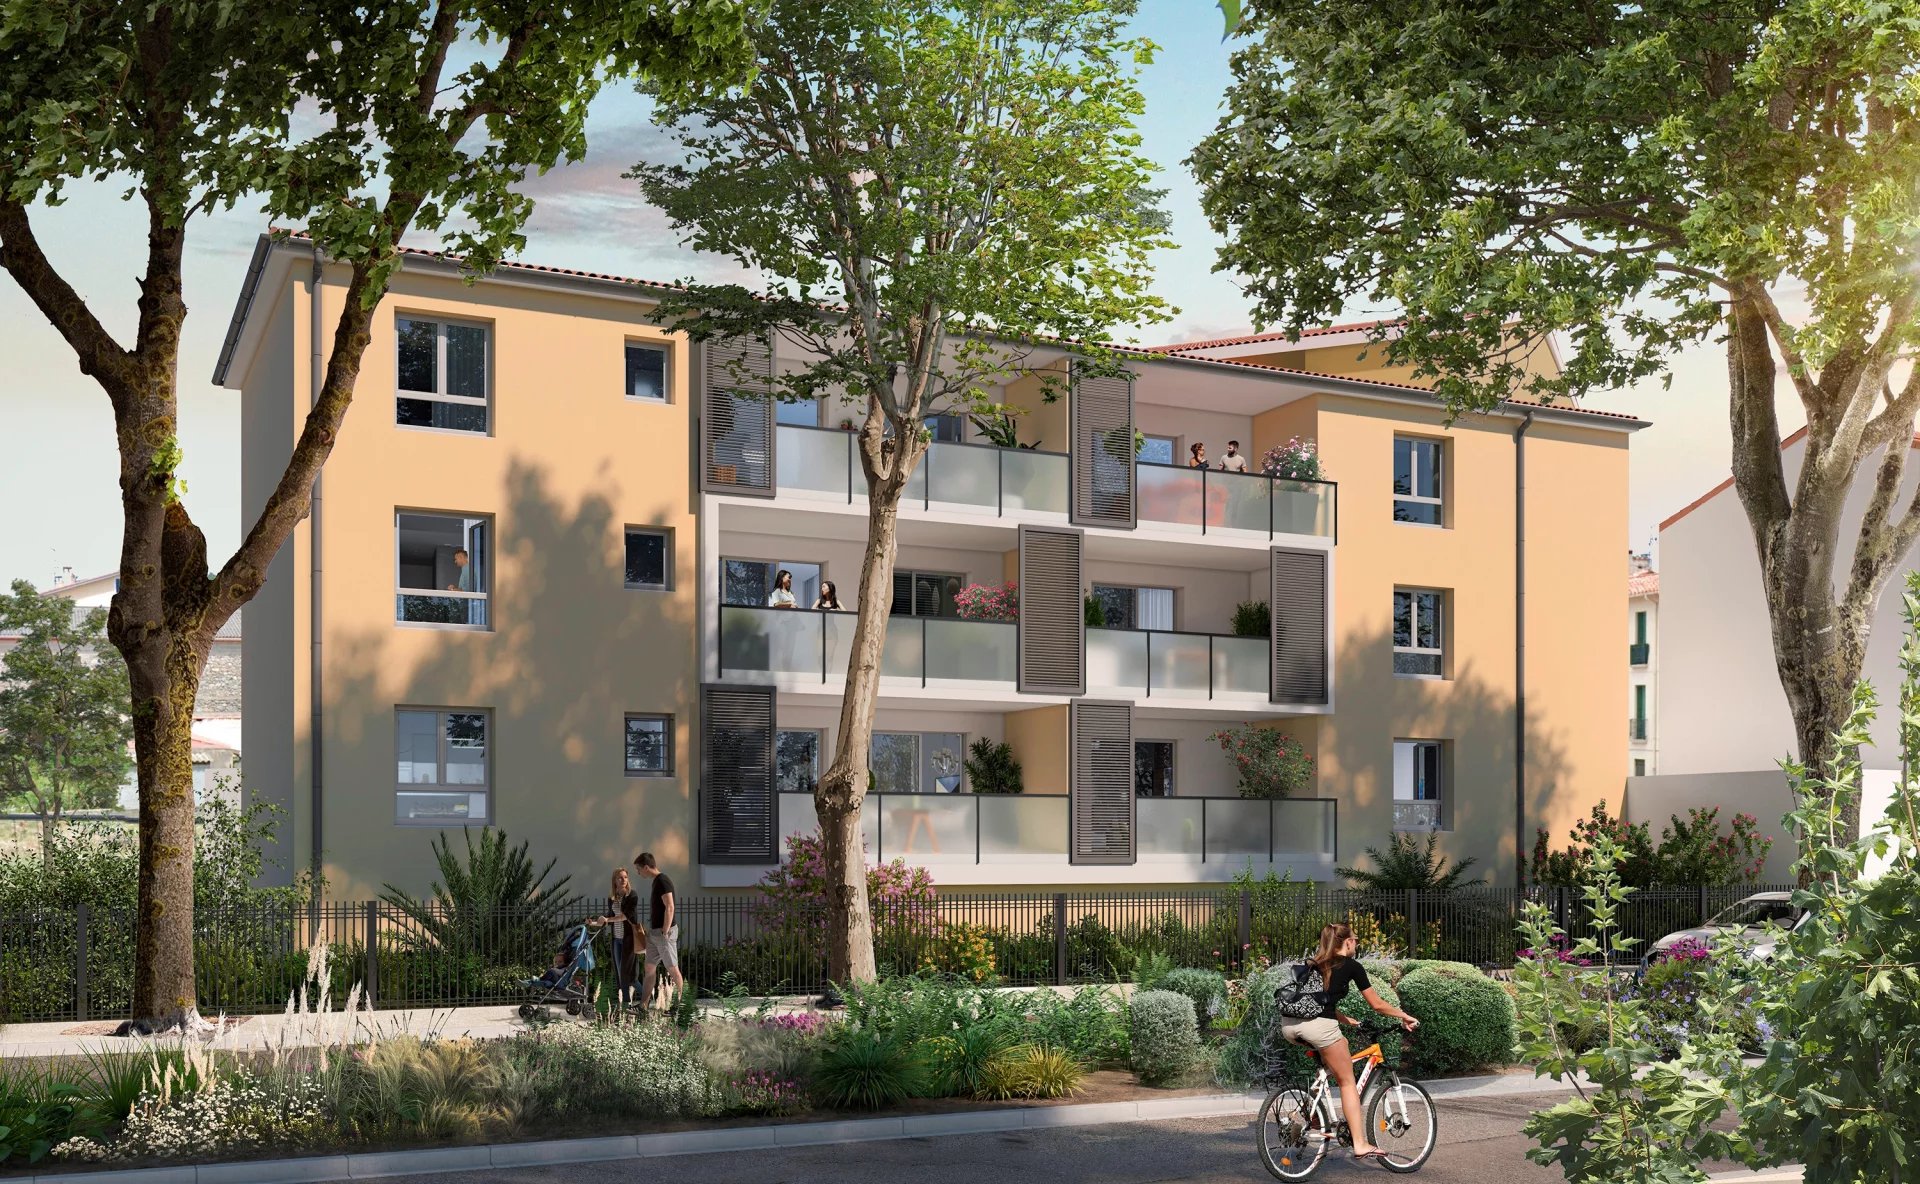 OFF-PLAN 1-BED APPARTMENT (LOT 101), RESIDENCE L'ANGLE DES ARTS, CERET